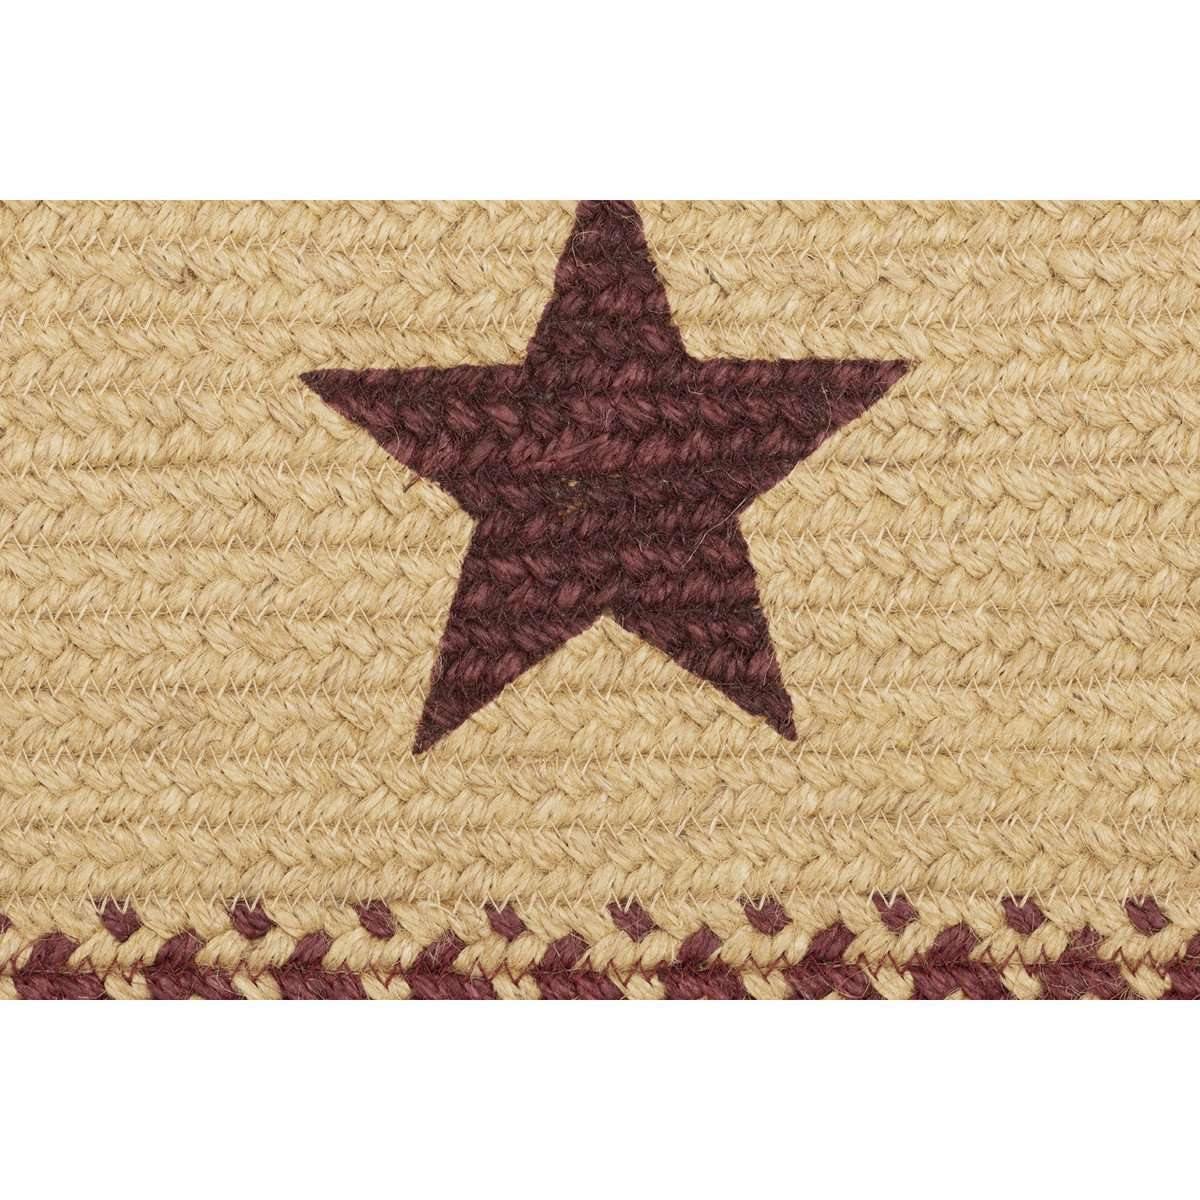 Burgundy Red Primitive Jute Braided Rug Oval Stencil Stars Welcome 20"x30" VHC Brands - The Fox Decor